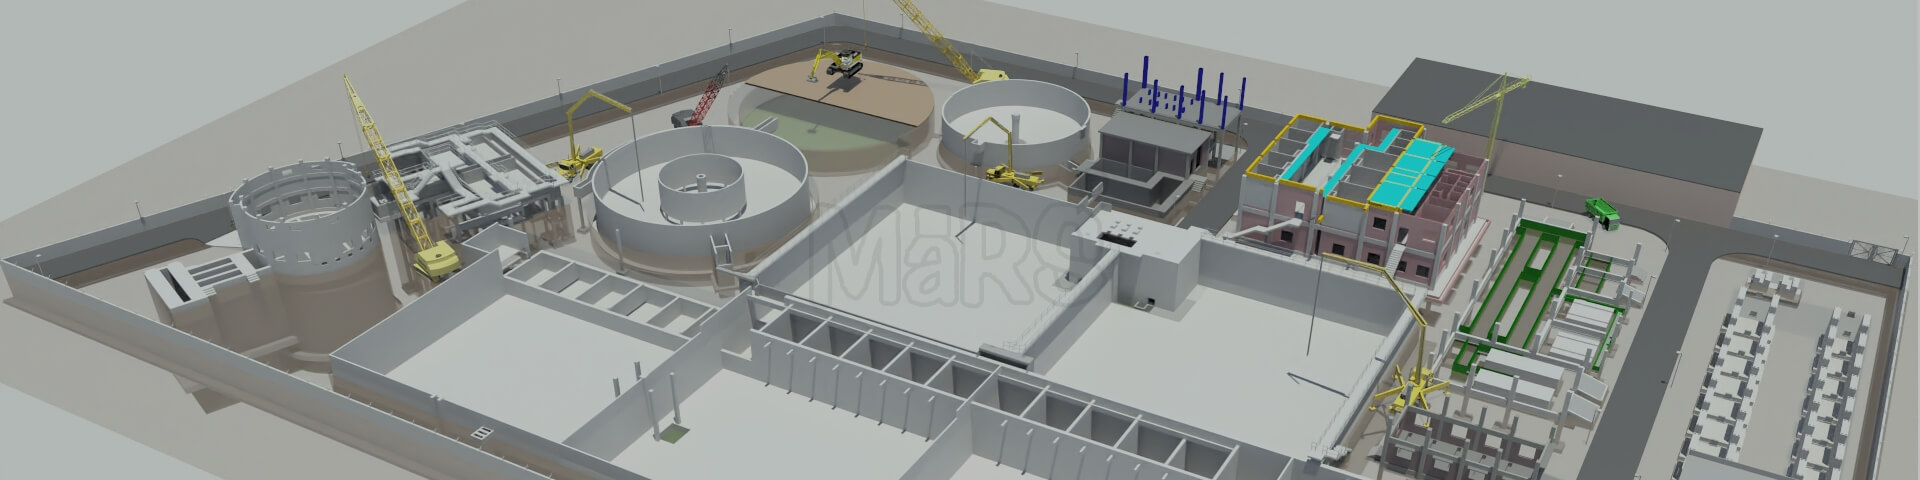 BIM for Water Supply and Wastewater Treatment Plant